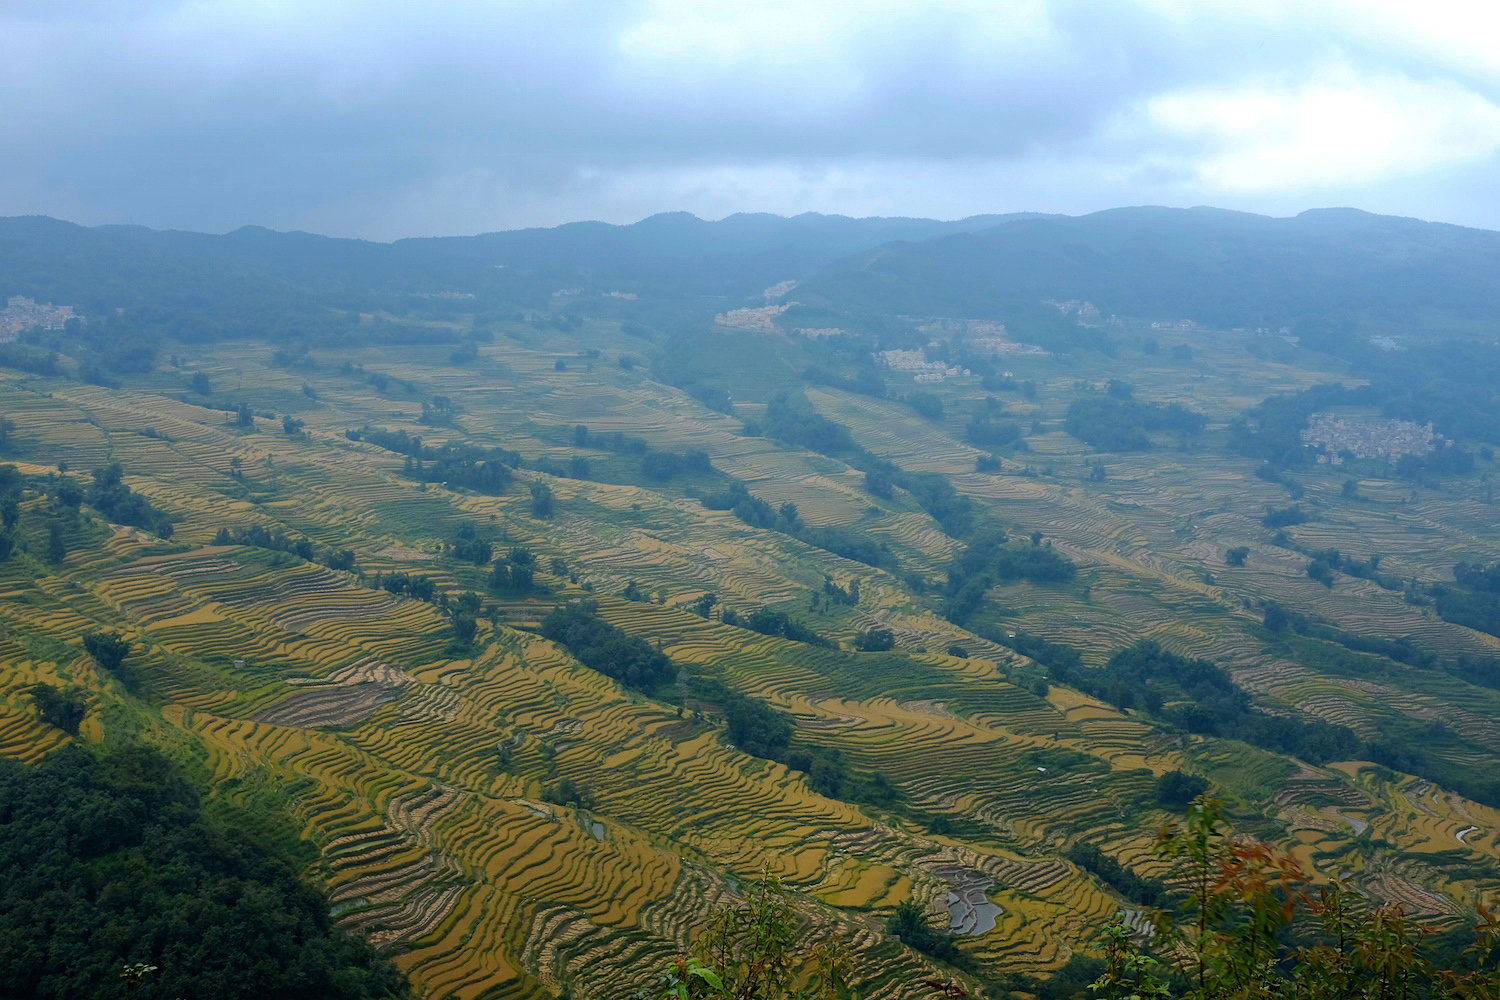 The rice terraces at harvest time